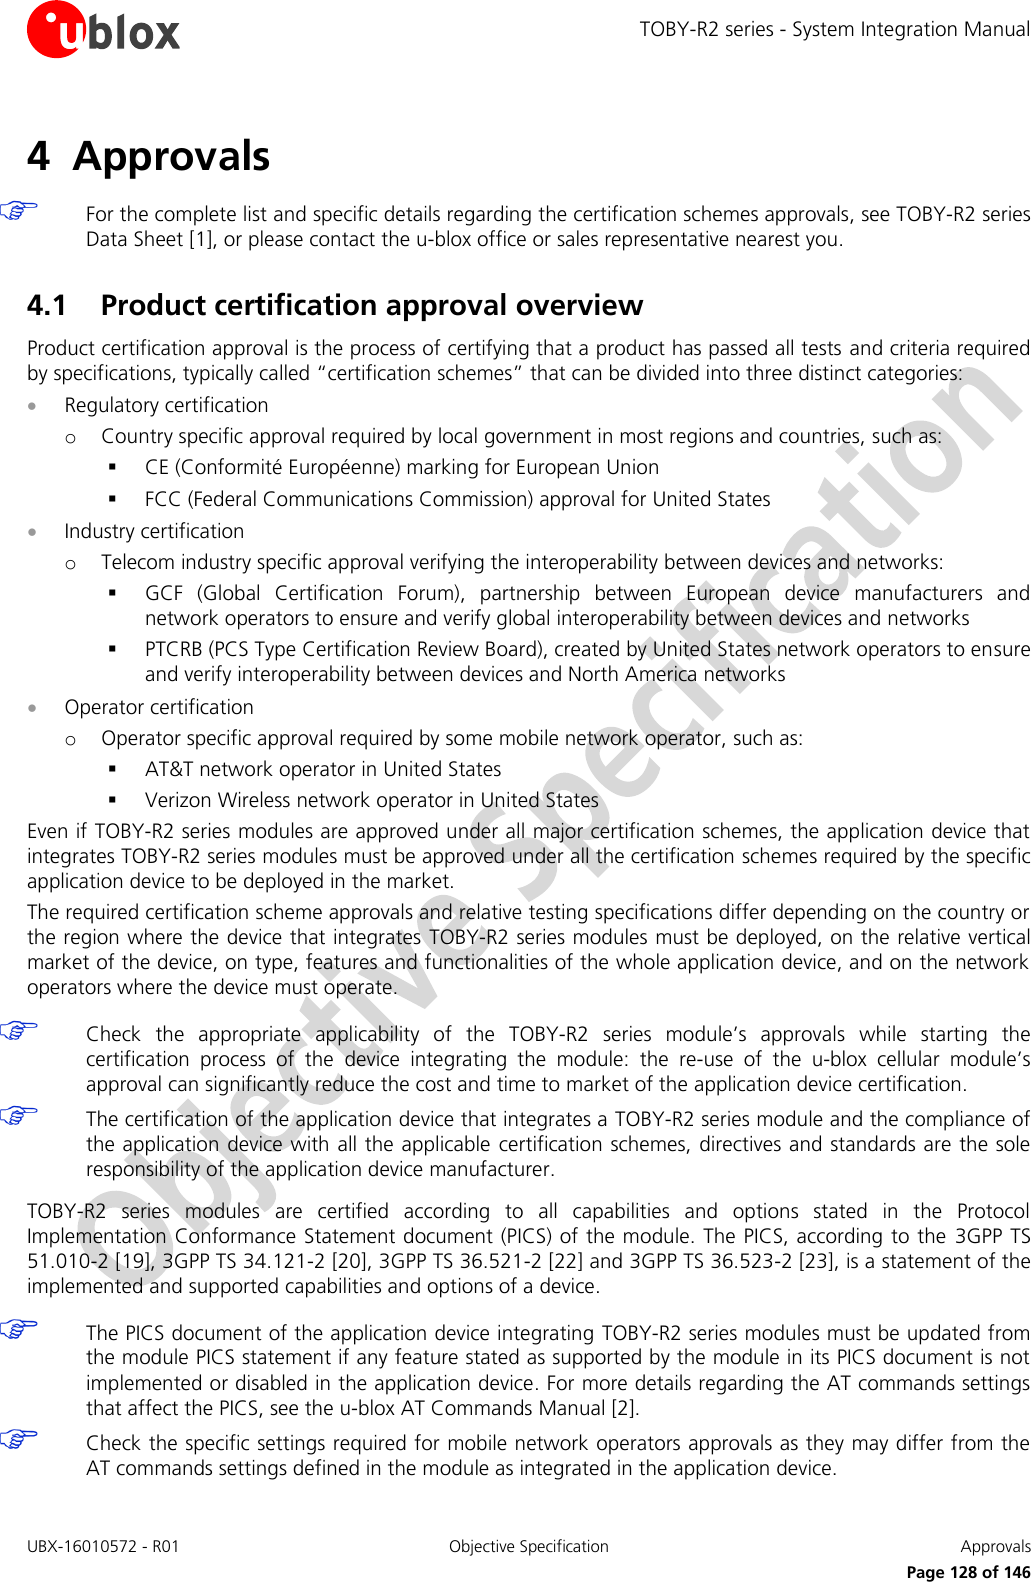 TOBY-R2 series - System Integration Manual UBX-16010572 - R01  Objective Specification  Approvals     Page 128 of 146 4 Approvals   For the complete list and specific details regarding the certification schemes approvals, see TOBY-R2 series Data Sheet [1], or please contact the u-blox office or sales representative nearest you.  4.1 Product certification approval overview Product certification approval is the process of certifying that a product has passed all tests and criteria required by specifications, typically called “certification schemes” that can be divided into three distinct categories:  Regulatory certification o Country specific approval required by local government in most regions and countries, such as:  CE (Conformité Européenne) marking for European Union  FCC (Federal Communications Commission) approval for United States  Industry certification o Telecom industry specific approval verifying the interoperability between devices and networks:  GCF  (Global  Certification  Forum),  partnership  between  European  device  manufacturers  and network operators to ensure and verify global interoperability between devices and networks  PTCRB (PCS Type Certification Review Board), created by United States network operators to ensure and verify interoperability between devices and North America networks  Operator certification o Operator specific approval required by some mobile network operator, such as:  AT&amp;T network operator in United States  Verizon Wireless network operator in United States Even if TOBY-R2 series modules are approved under all major certification schemes, the application device that integrates TOBY-R2 series modules must be approved under all the certification schemes required by the specific application device to be deployed in the market. The required certification scheme approvals and relative testing specifications differ depending on the country or the region where the device that integrates TOBY-R2 series modules must be deployed, on the relative vertical market of the device, on type, features and functionalities of the whole application device, and on the network operators where the device must operate.   Check  the  appropriate  applicability  of  the  TOBY-R2  series  module’s  approvals  while  starting  the certification  process  of  the  device  integrating  the  module:  the  re-use  of  the  u-blox  cellular  module’s approval can significantly reduce the cost and time to market of the application device certification.  The certification of the application device that integrates a TOBY-R2 series module and the compliance of the application device with all the applicable certification schemes, directives and standards are the sole responsibility of the application device manufacturer.  TOBY-R2  series  modules  are  certified  according  to  all  capabilities  and  options  stated  in  the  Protocol Implementation Conformance Statement document (PICS) of the module. The PICS, according to the  3GPP TS 51.010-2 [19], 3GPP TS 34.121-2 [20], 3GPP TS 36.521-2 [22] and 3GPP TS 36.523-2 [23], is a statement of the implemented and supported capabilities and options of a device.   The PICS document of the application device integrating TOBY-R2 series modules must be updated from the module PICS statement if any feature stated as supported by the module in its PICS document is not implemented or disabled in the application device. For more details regarding the AT commands settings that affect the PICS, see the u-blox AT Commands Manual [2].  Check the specific settings required for mobile network operators approvals as they may differ from the AT commands settings defined in the module as integrated in the application device.  